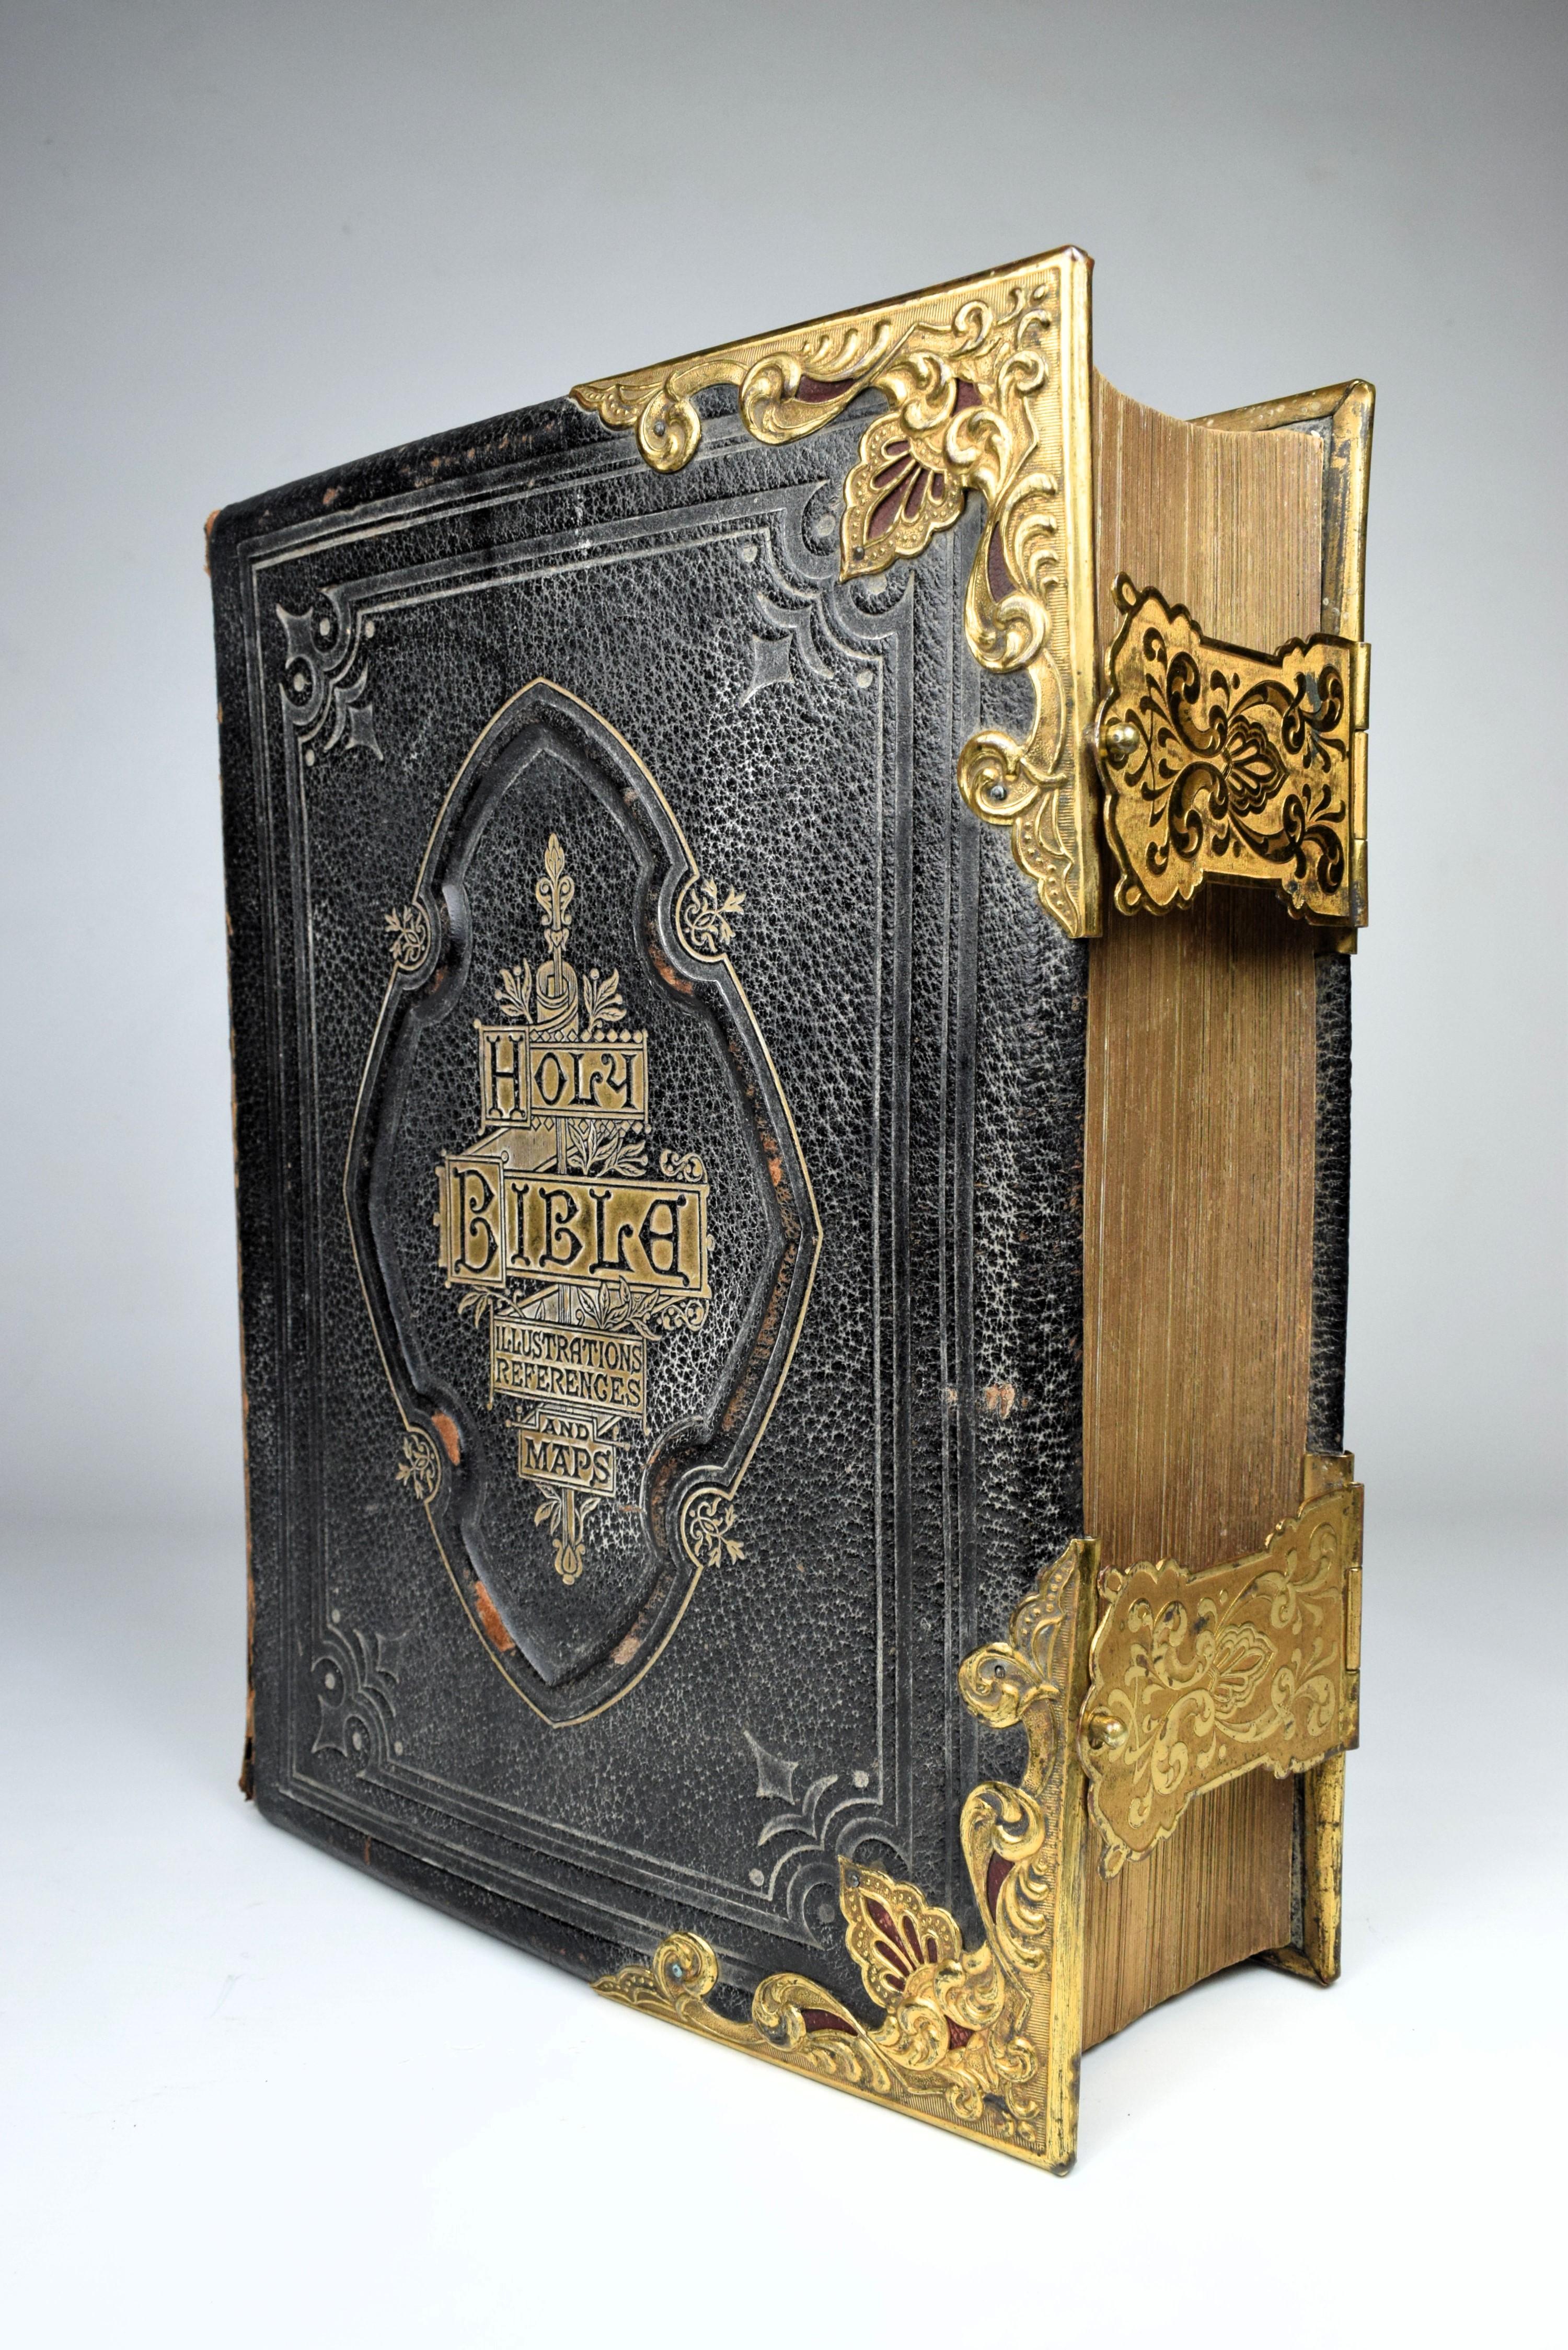 The Holy Bible With An Abridgement Of The Commentaries Of Scott And Henry

Bound in full navy Morocco with the covers displaying open-tooled bordering details, an indented central titular crest in gilt-tooling, and gold-plated floral corner caps